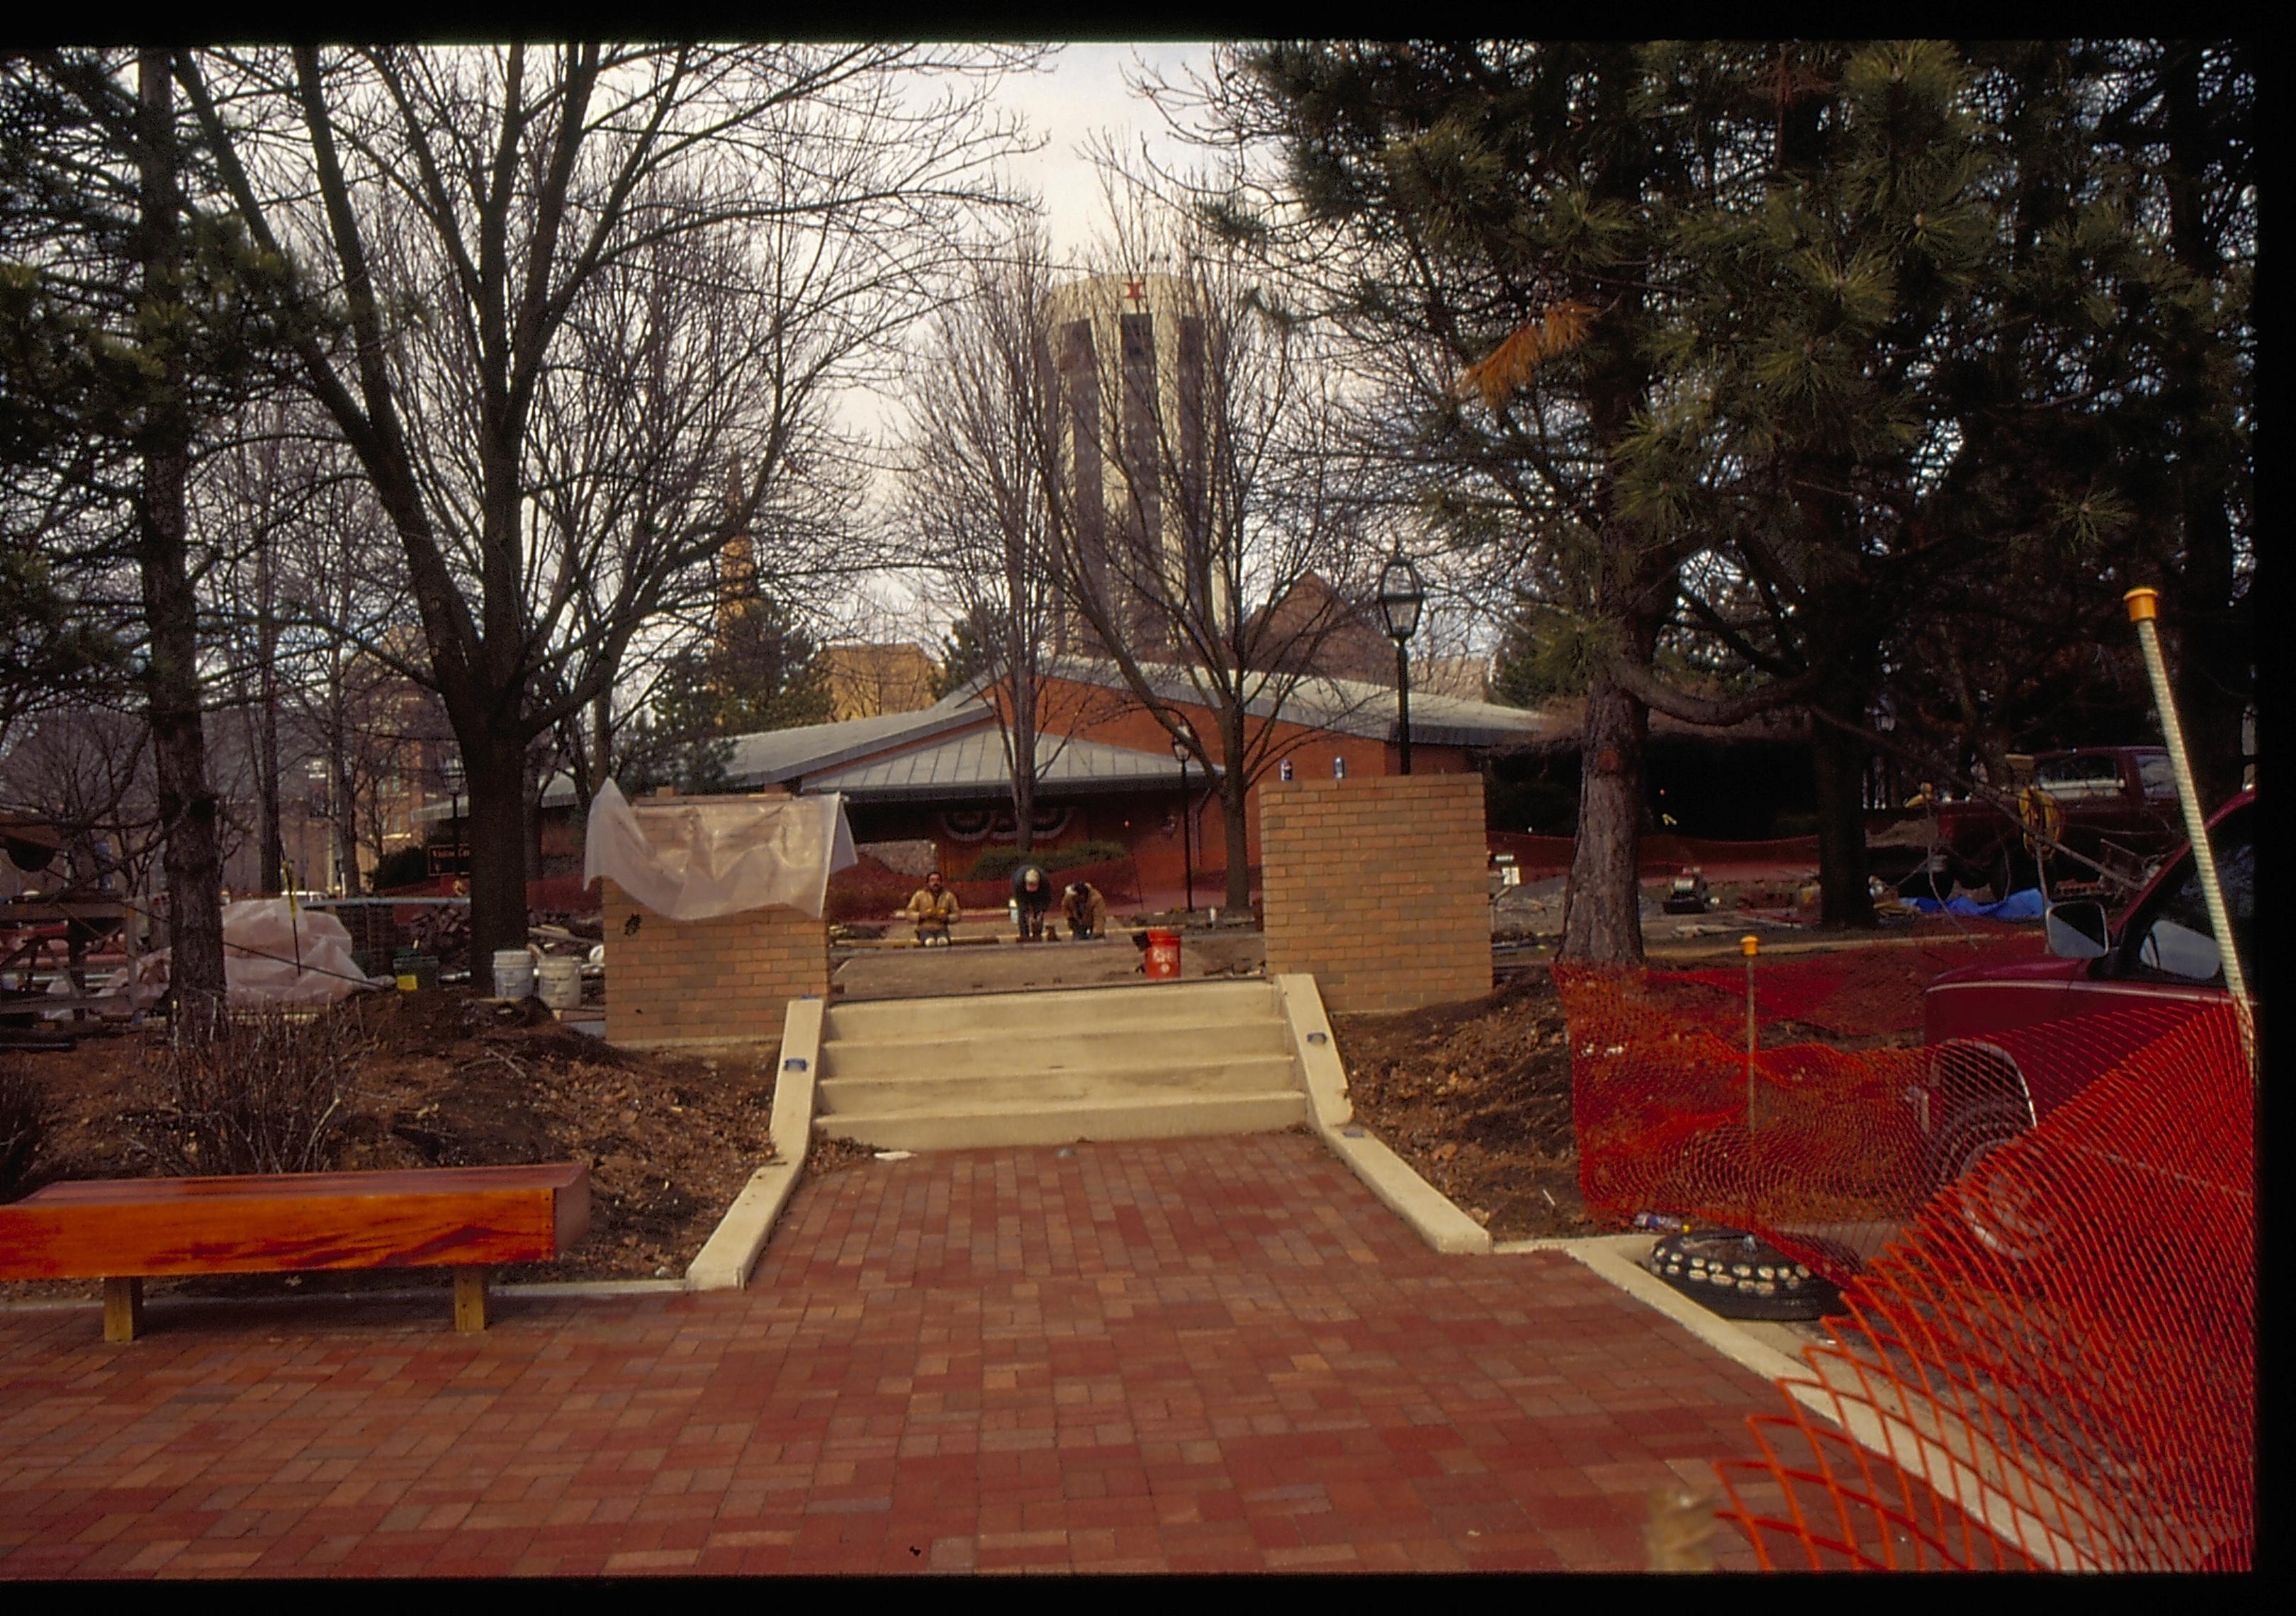 parking lot/new stairs Lincoln Home NHS- Visitor Center, Roll 1999-2 exp 10 Visitor Center, construction